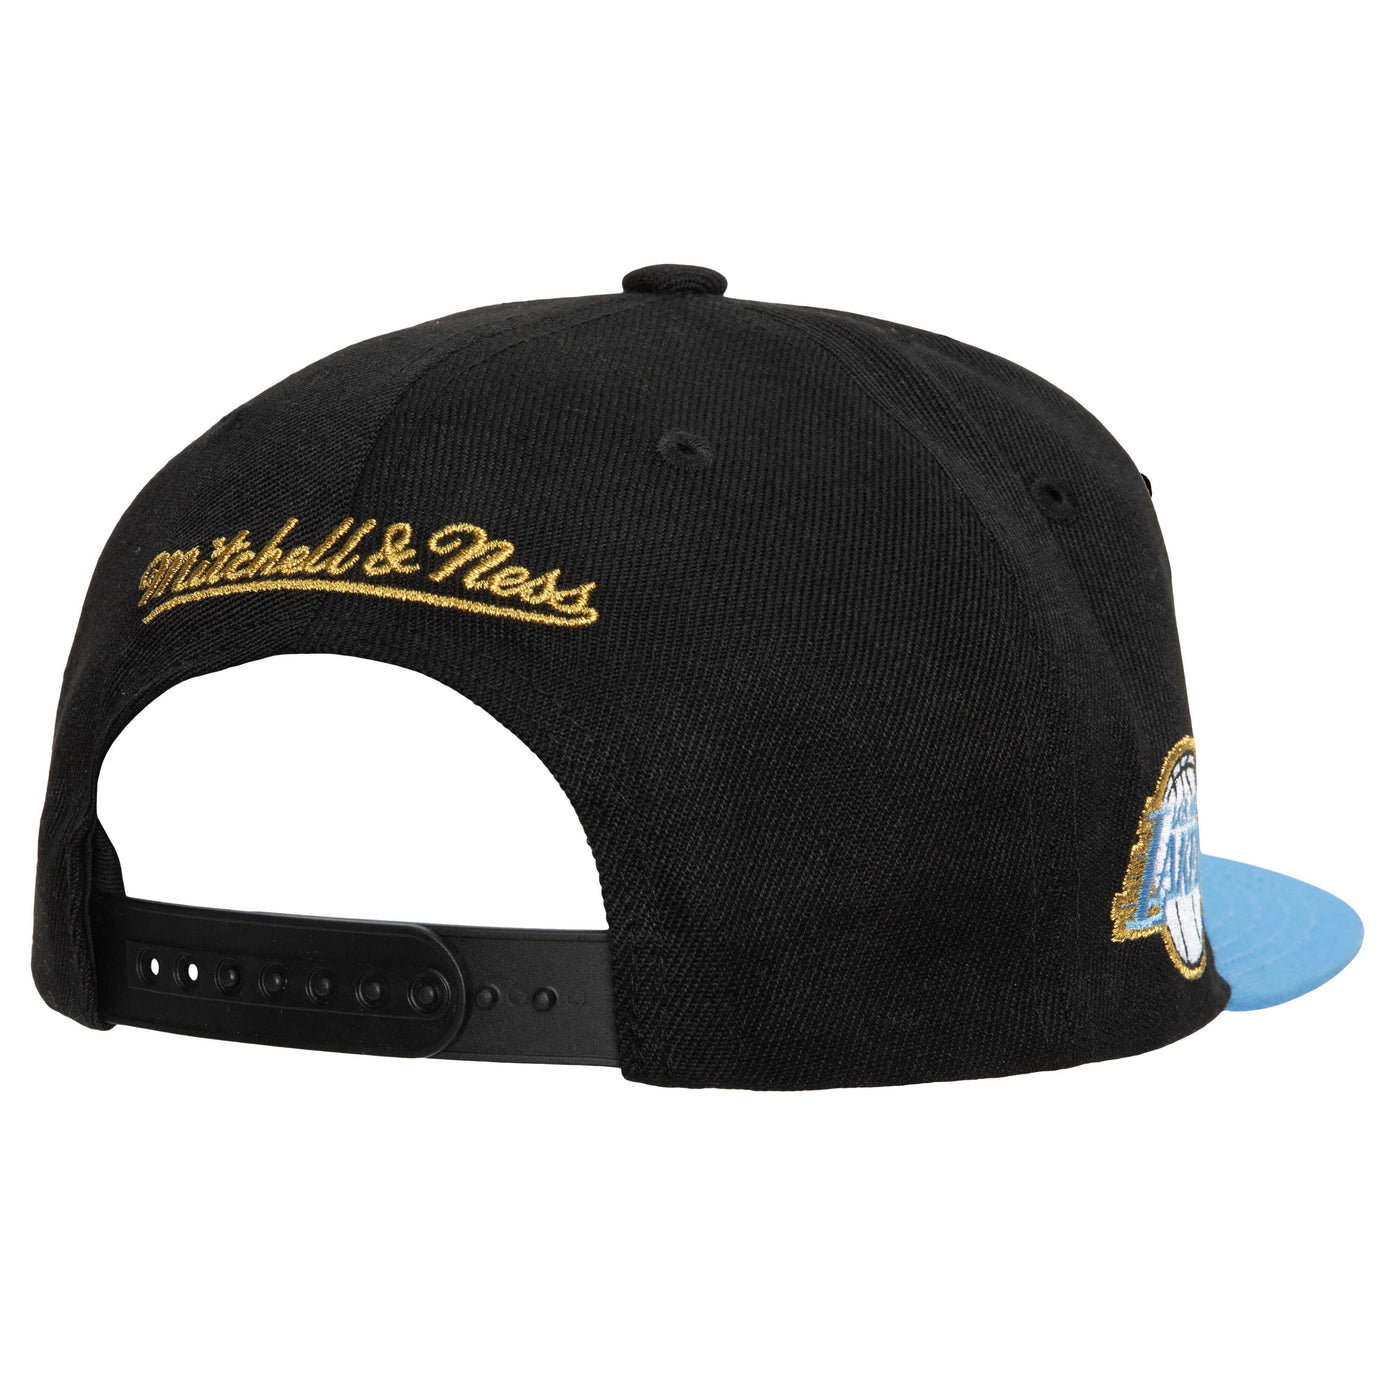 Mitchell & Ness 75th Anniversary Gold Snapback Hat Los Angeles Lakers Black Back